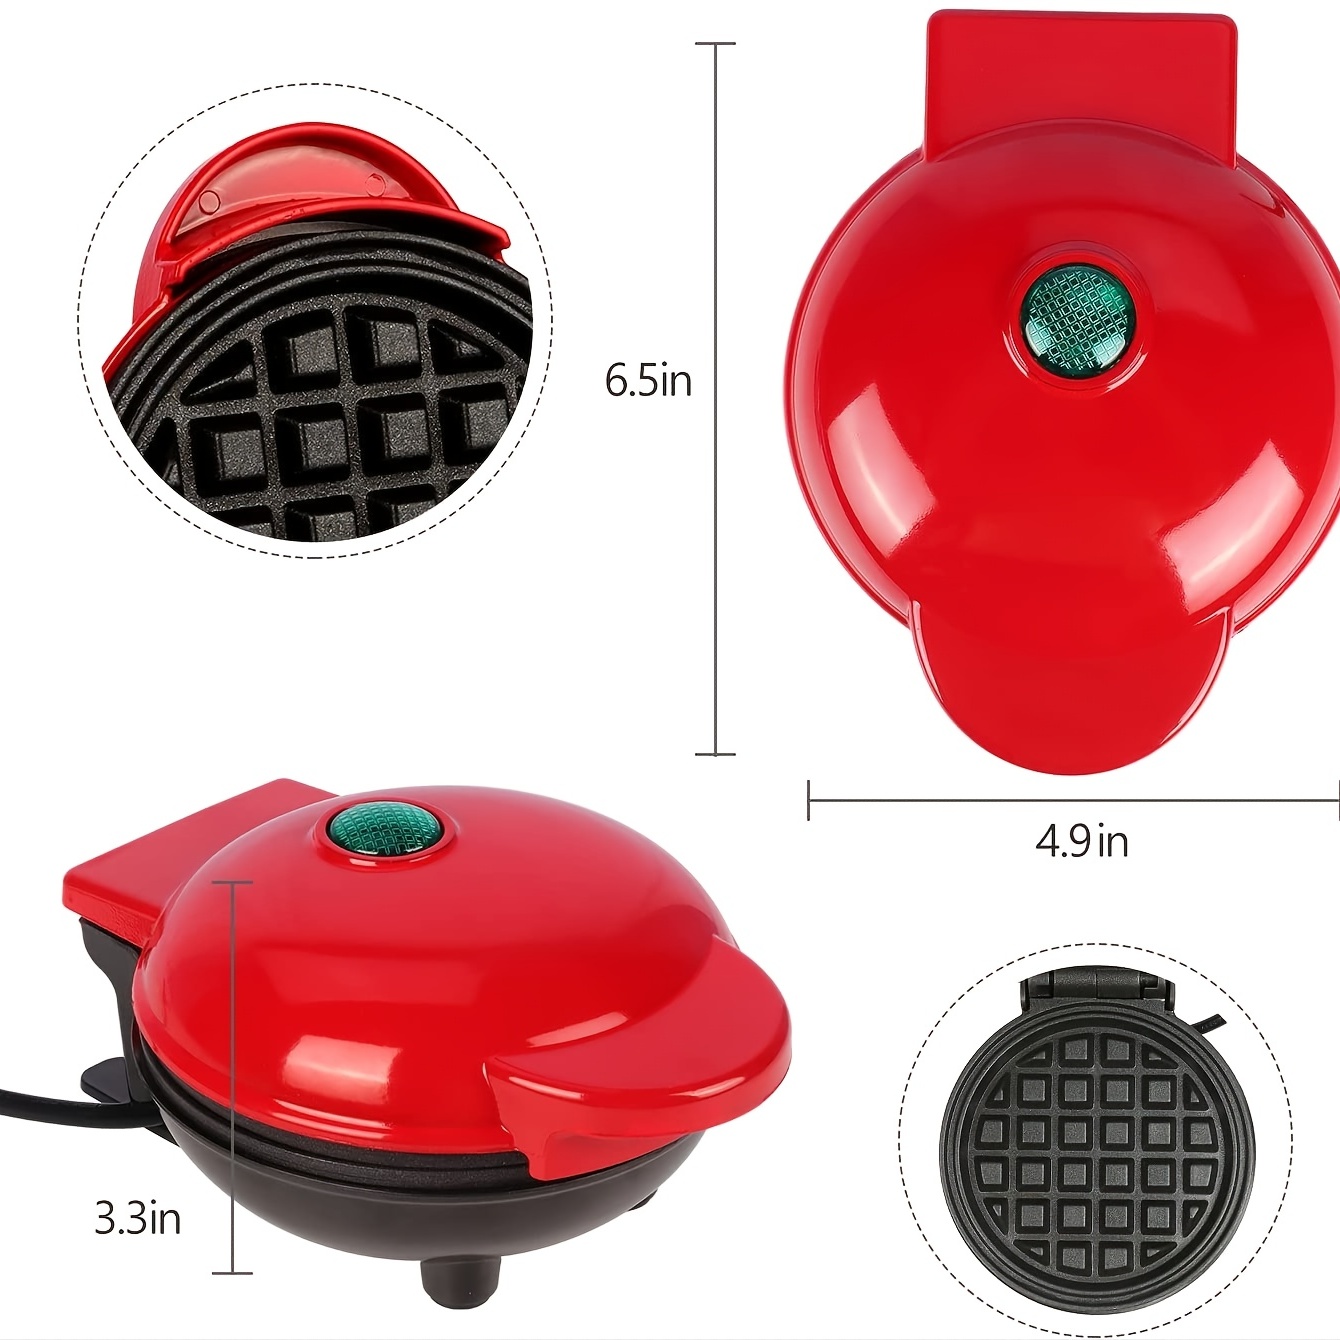 Dash Mini Maker Electric Round Griddle for Individual Pancakes Cookies 4”